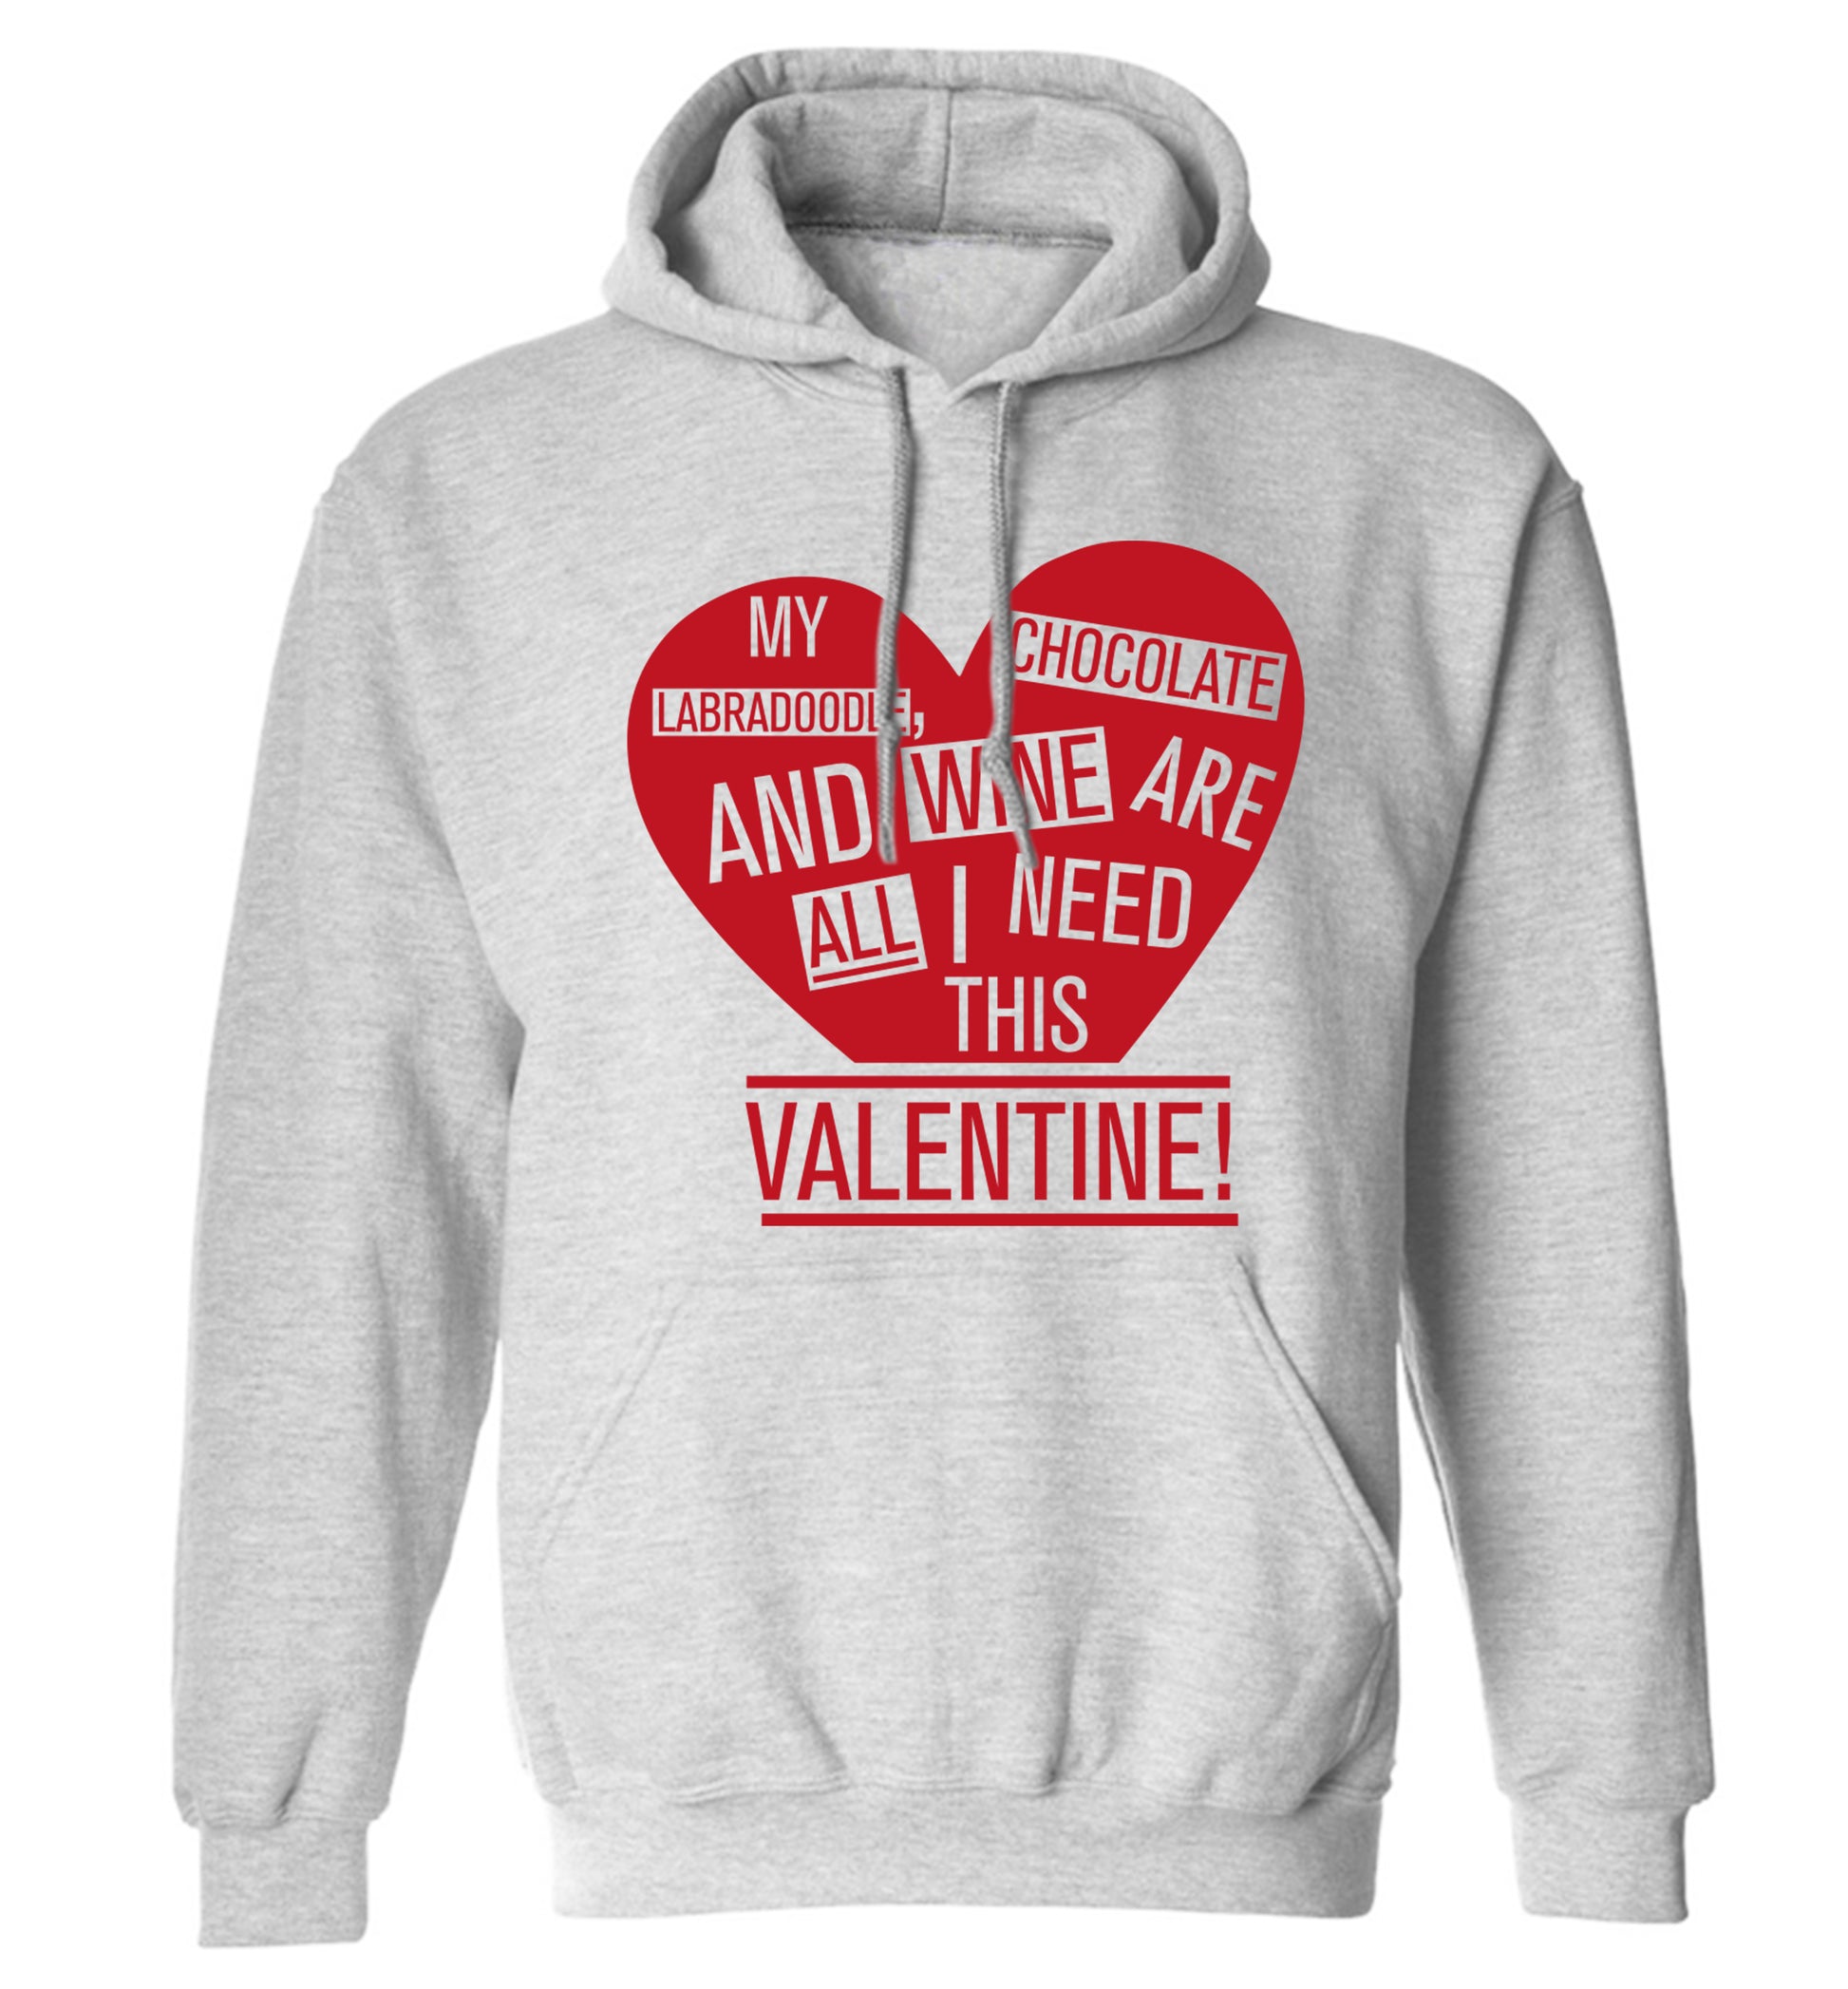 My labradoodle, chocolate and wine are all I need this valentine! adults unisex grey hoodie 2XL